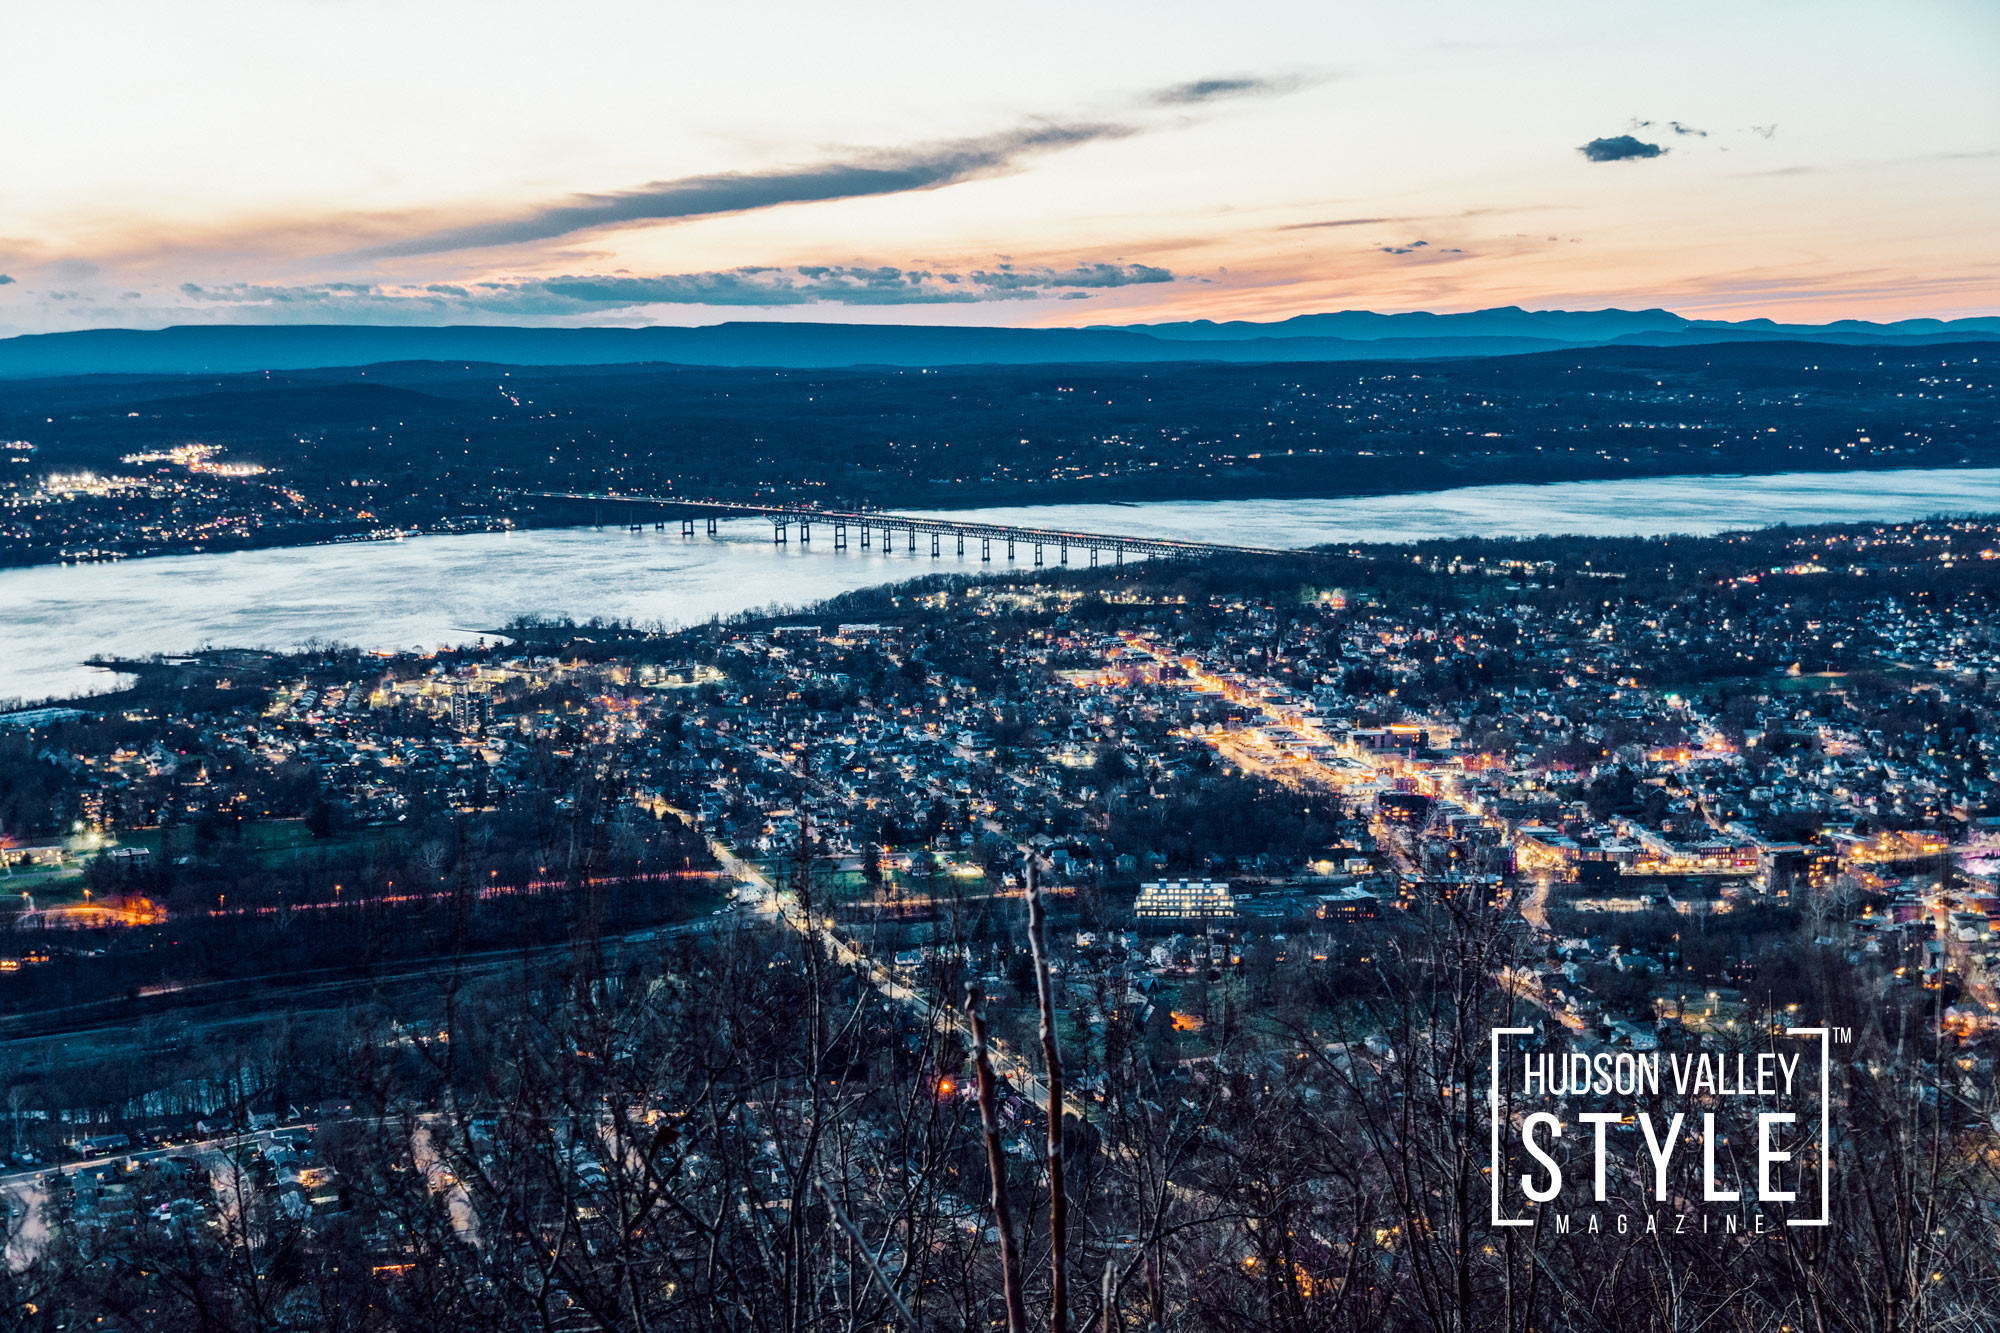 Hiking to the Summit of Mt. Beacon for Breathtaking Hudson River Views – Exploring Hudson Valley with Photographer Maxwell Alexander